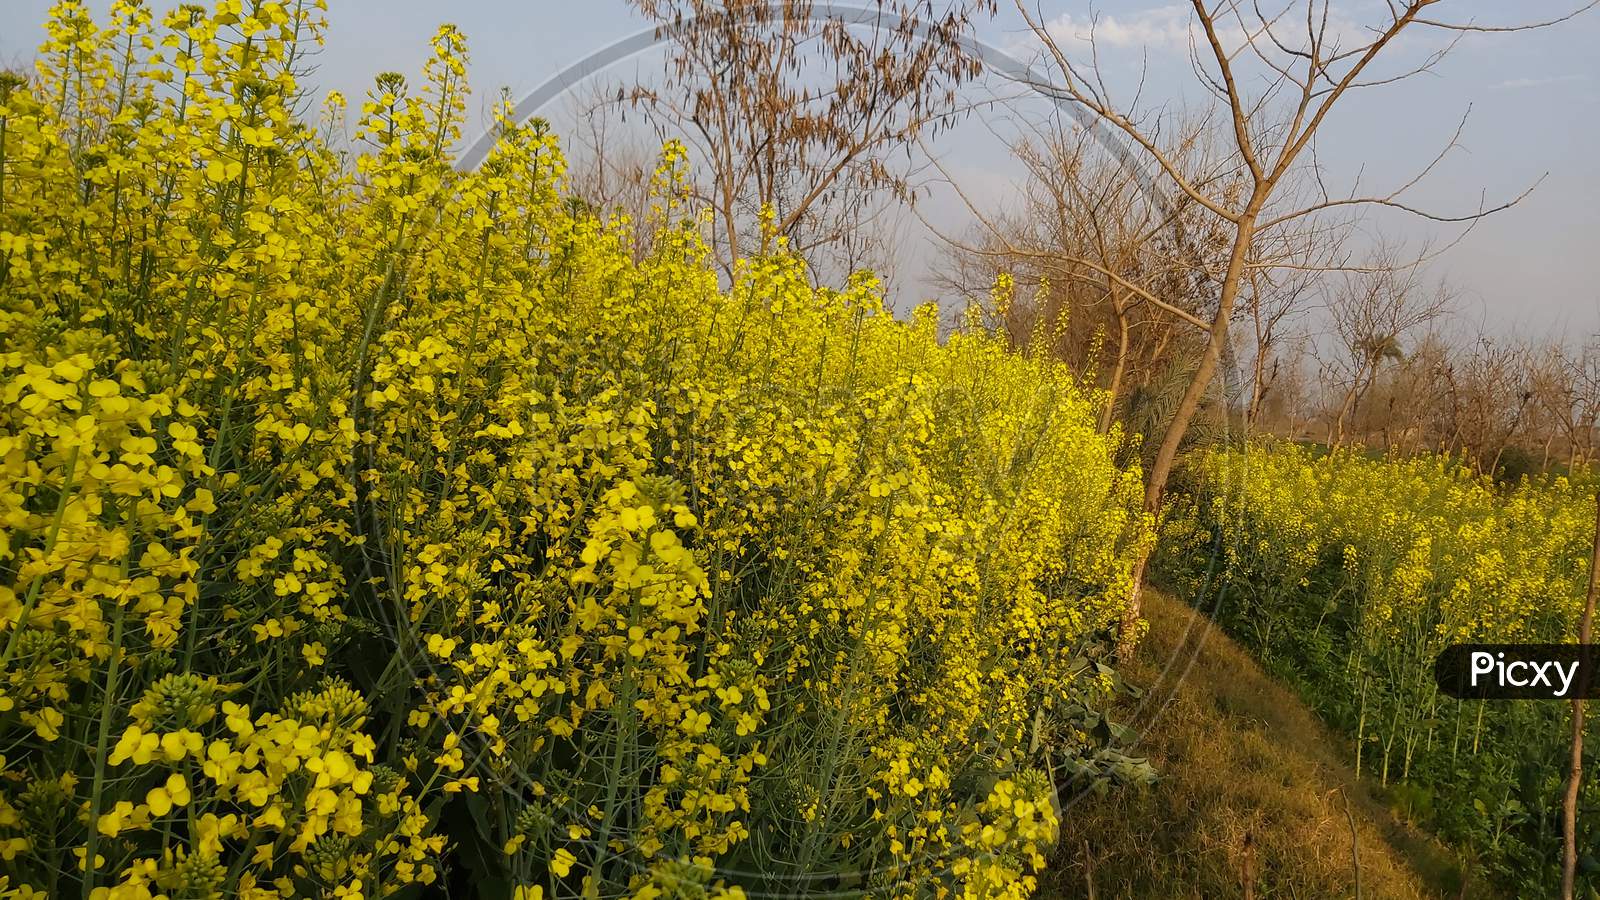 Yellow Mustered Blossoming Flowers In The Field